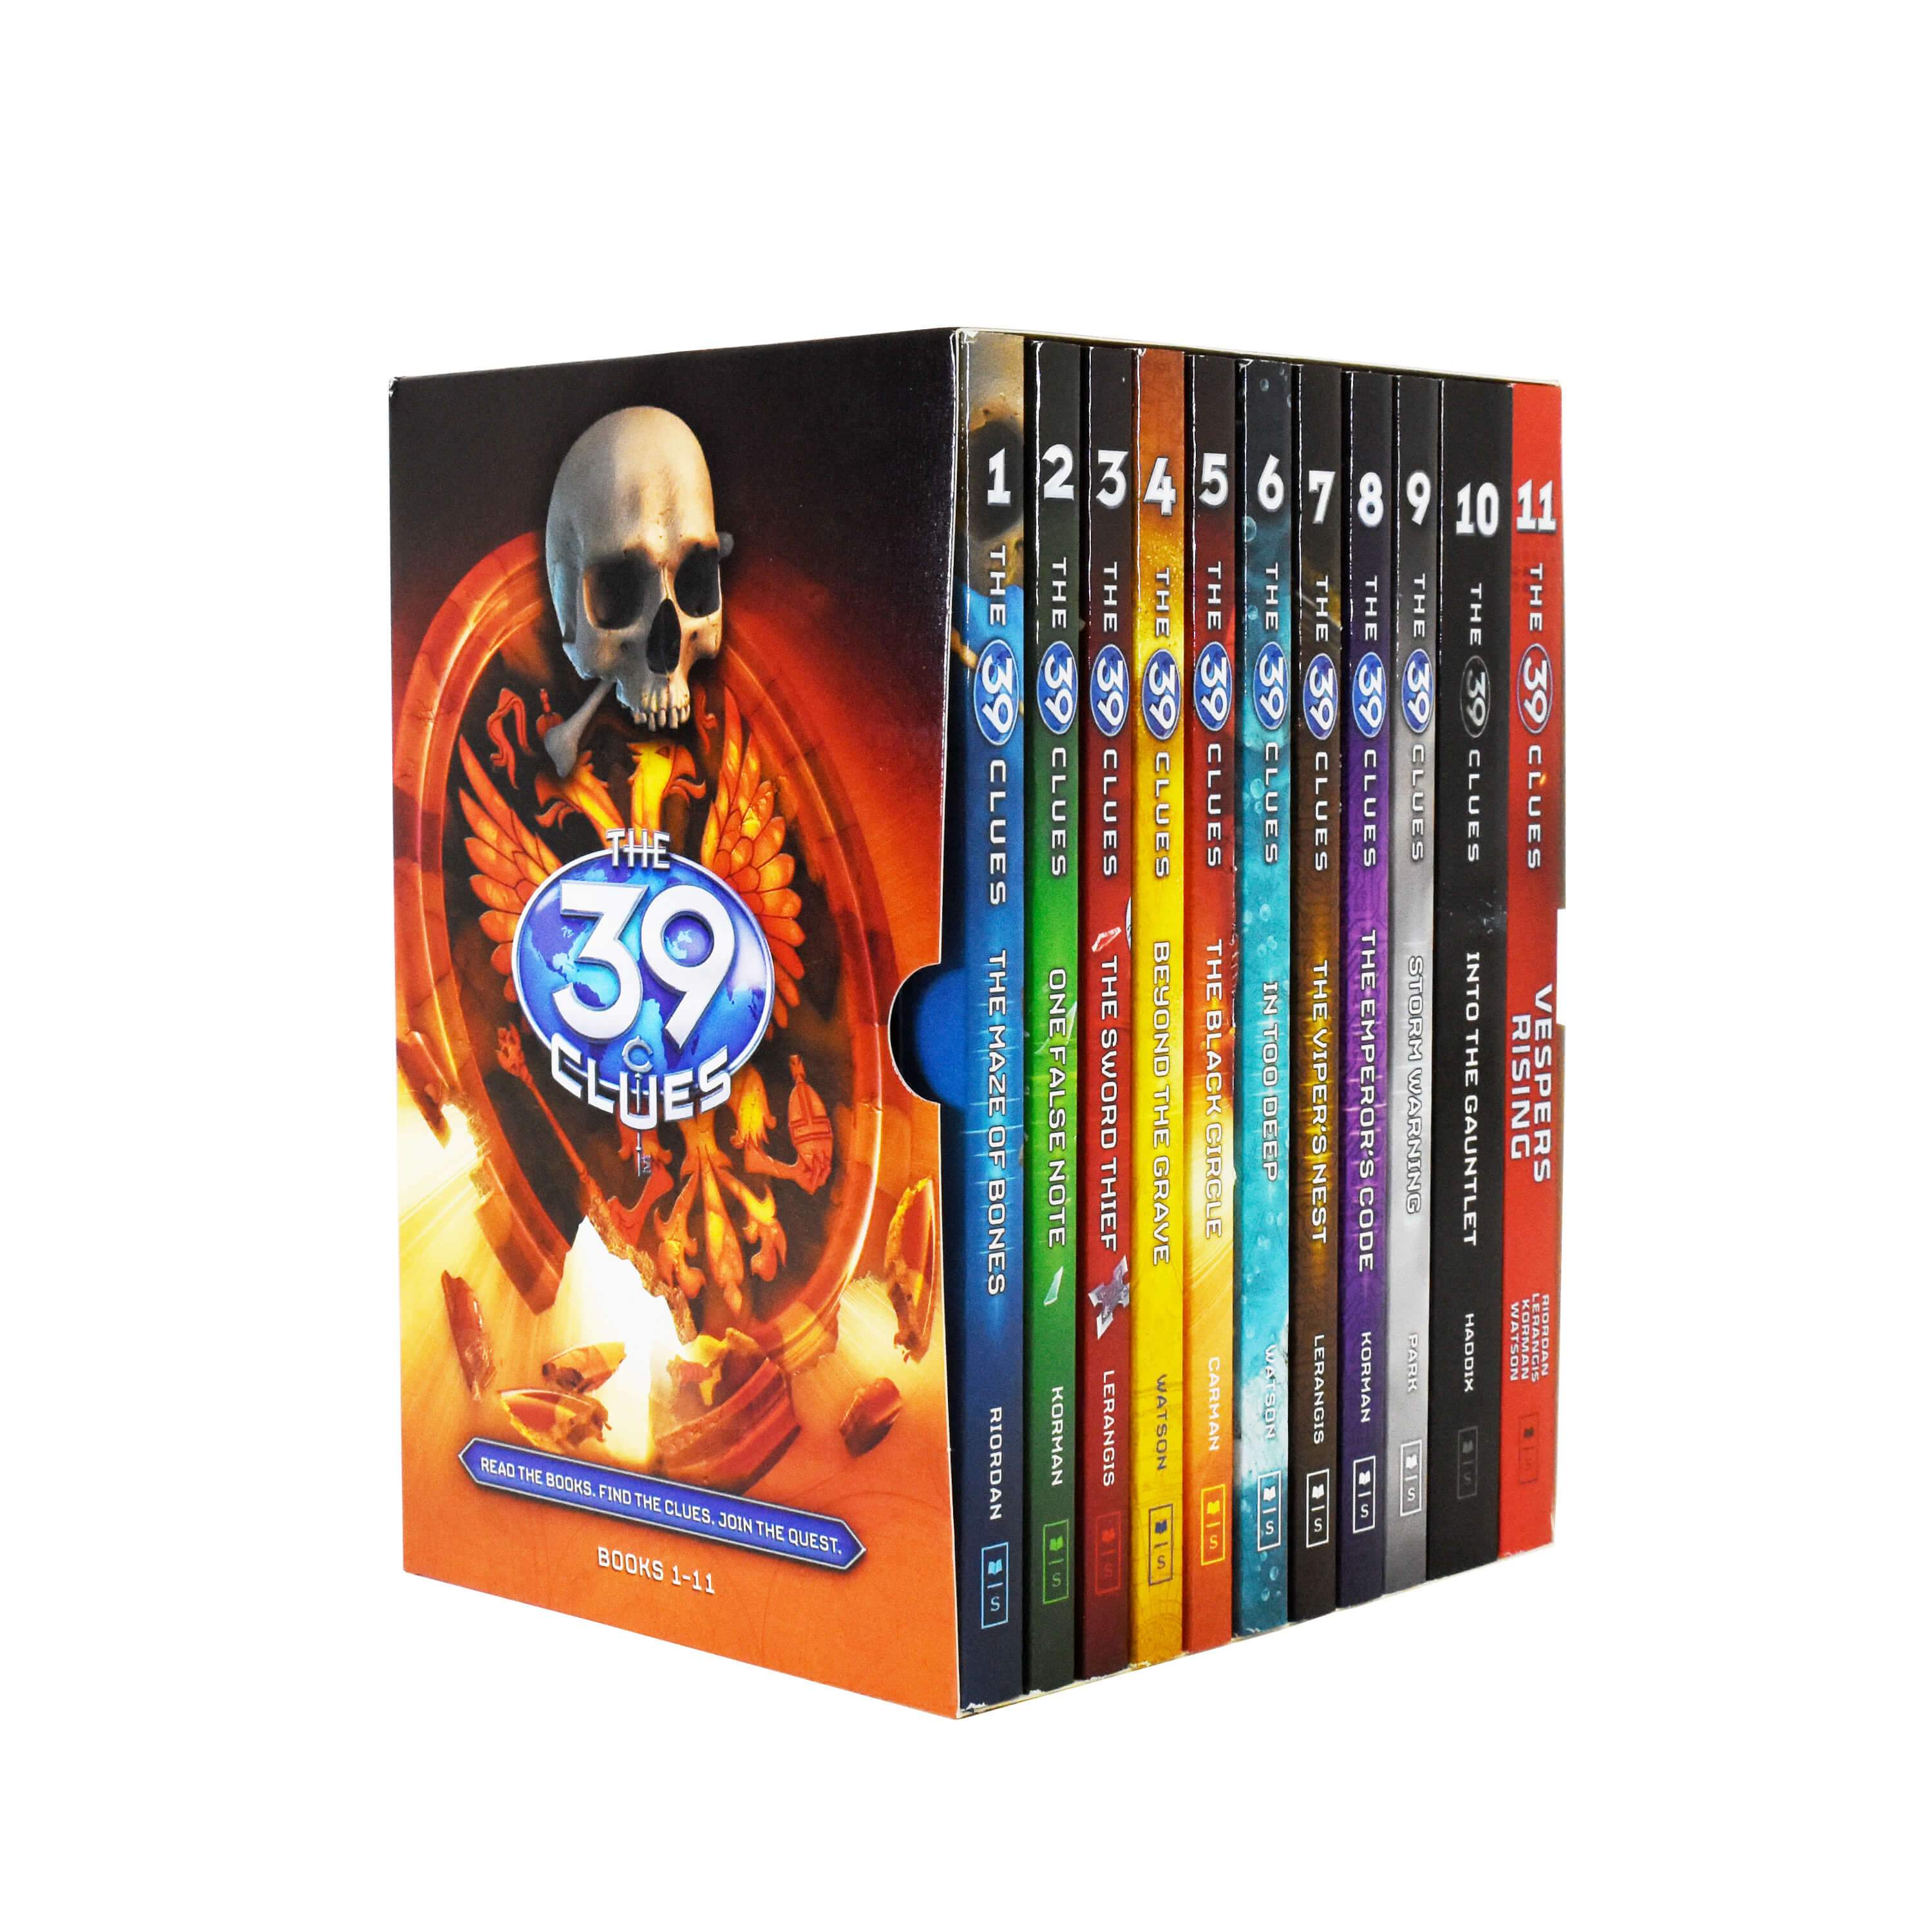 39 Clues Series 11 Books Young Adult Collection Paperback Box Set By Riordan Rick - St Stephens Books